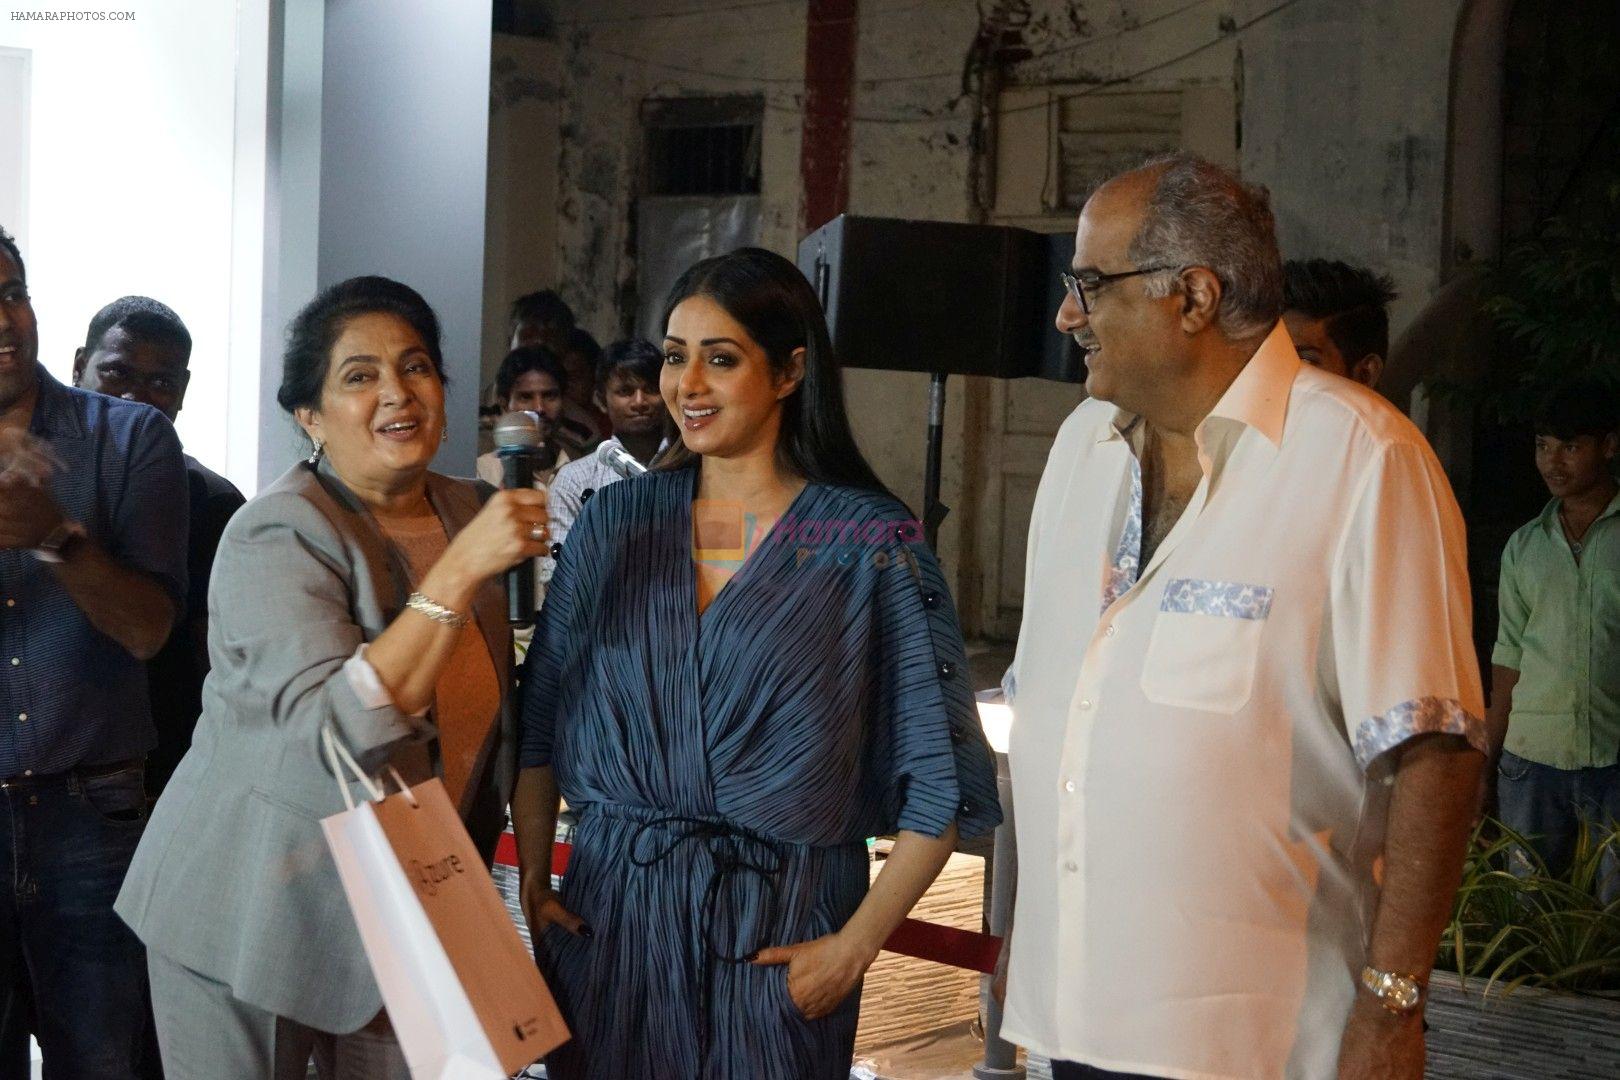 Sridevi, Boney Kapoor at the Launch Of IPhone 8 & IPhone 8+ At iAzure on 29th Sept 2017